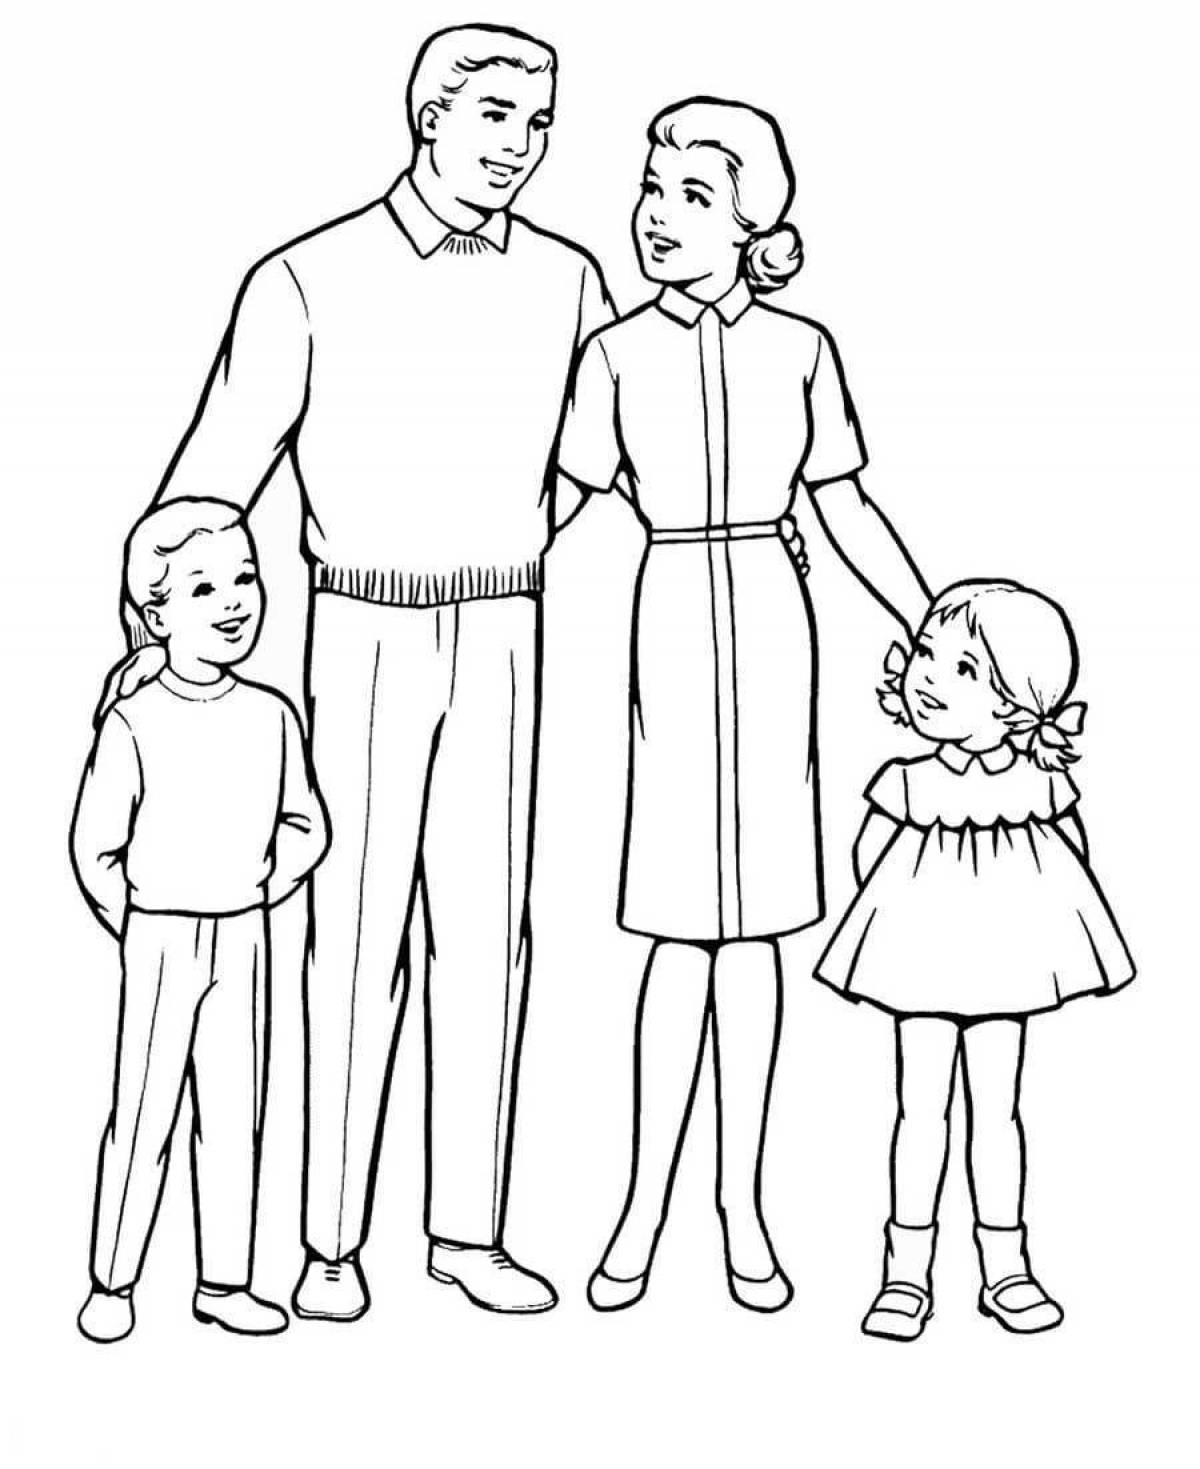 Bright family coloring book for kids